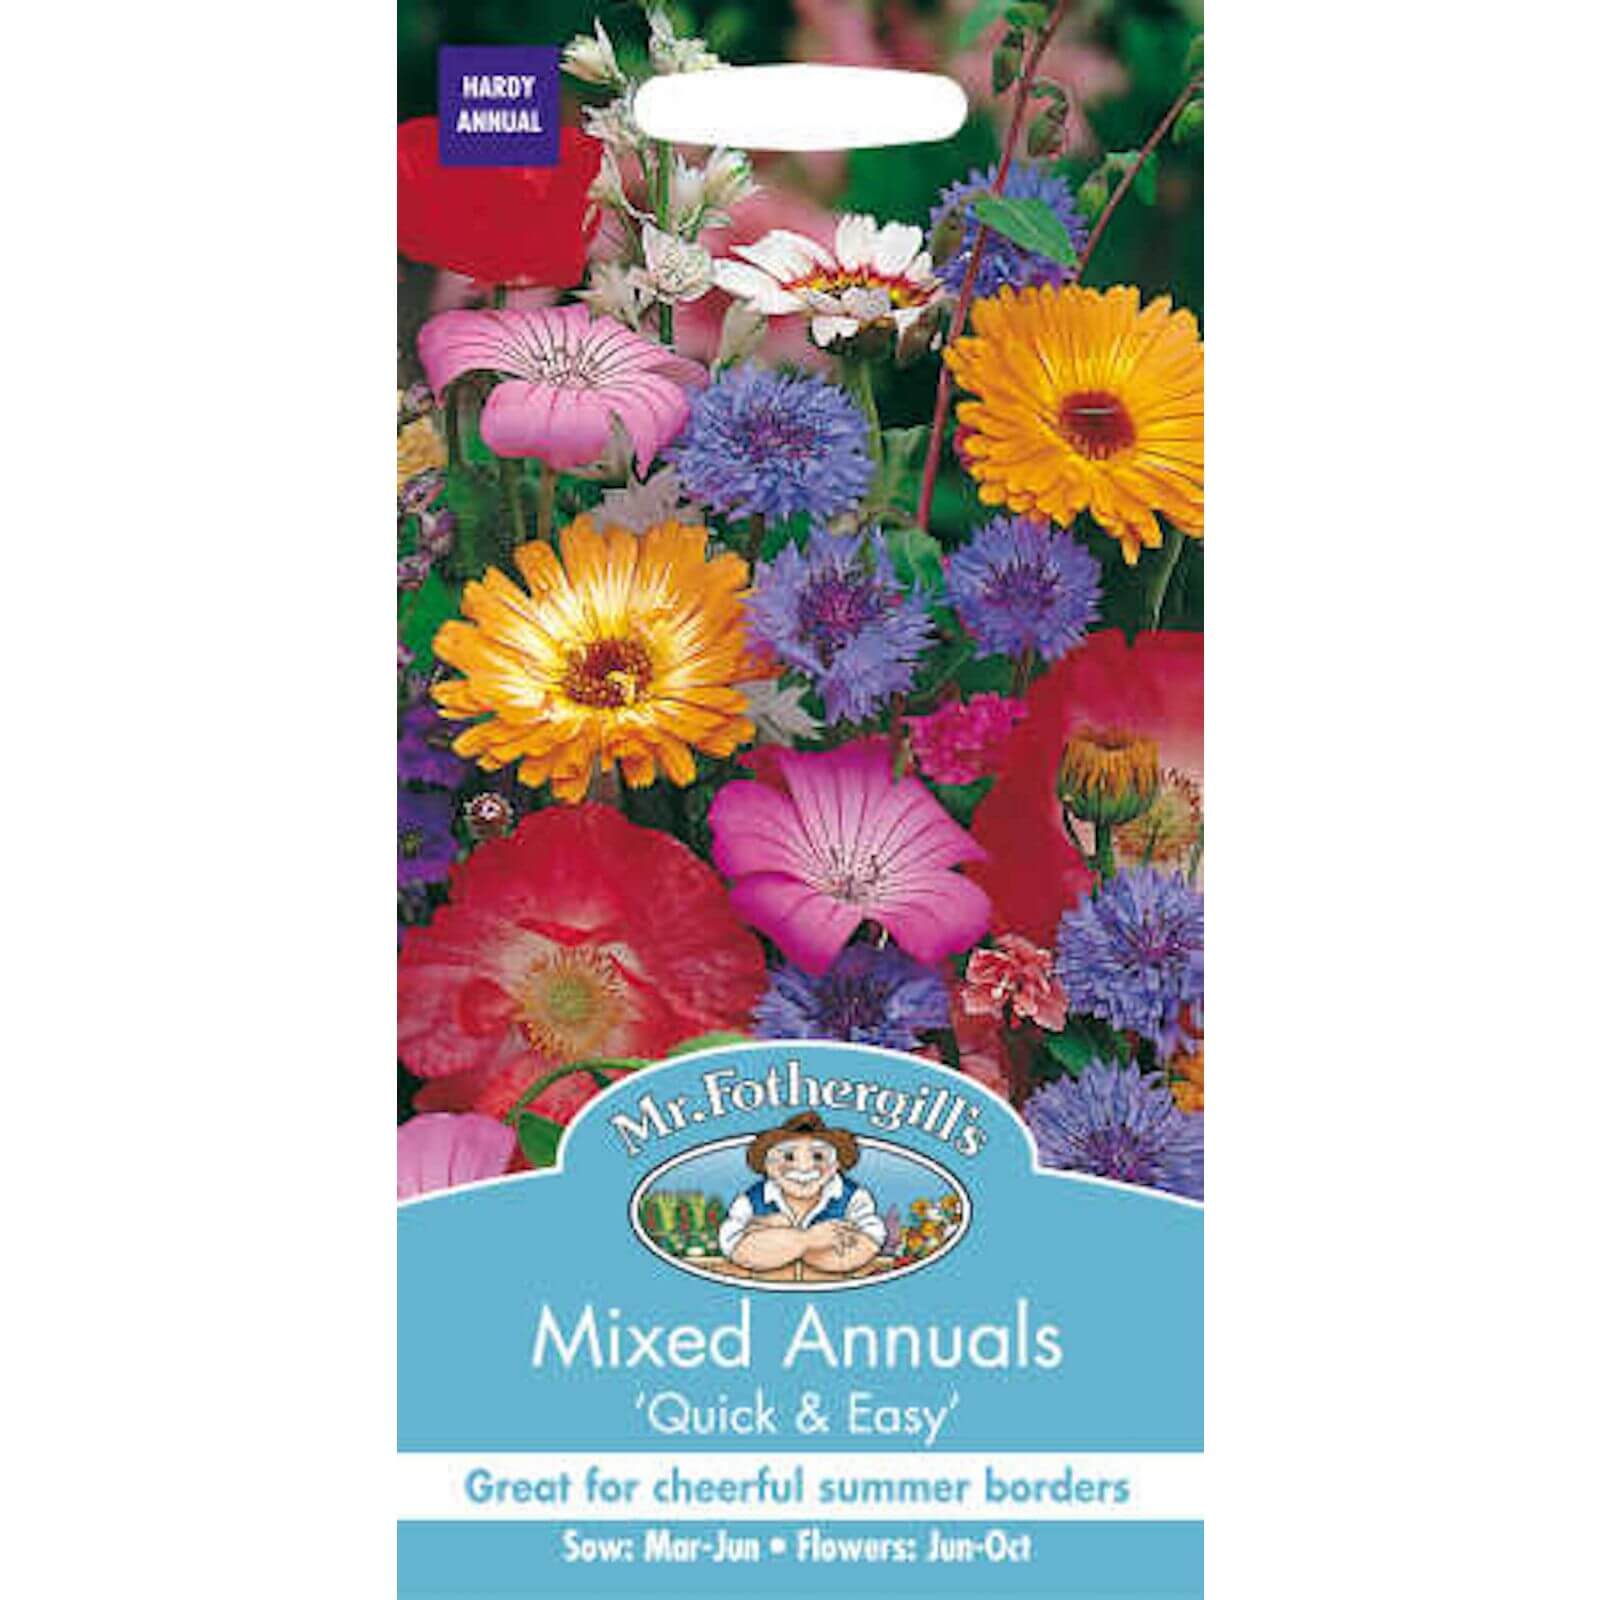 Mr. Fothergill's Mixed Annuals Seeds